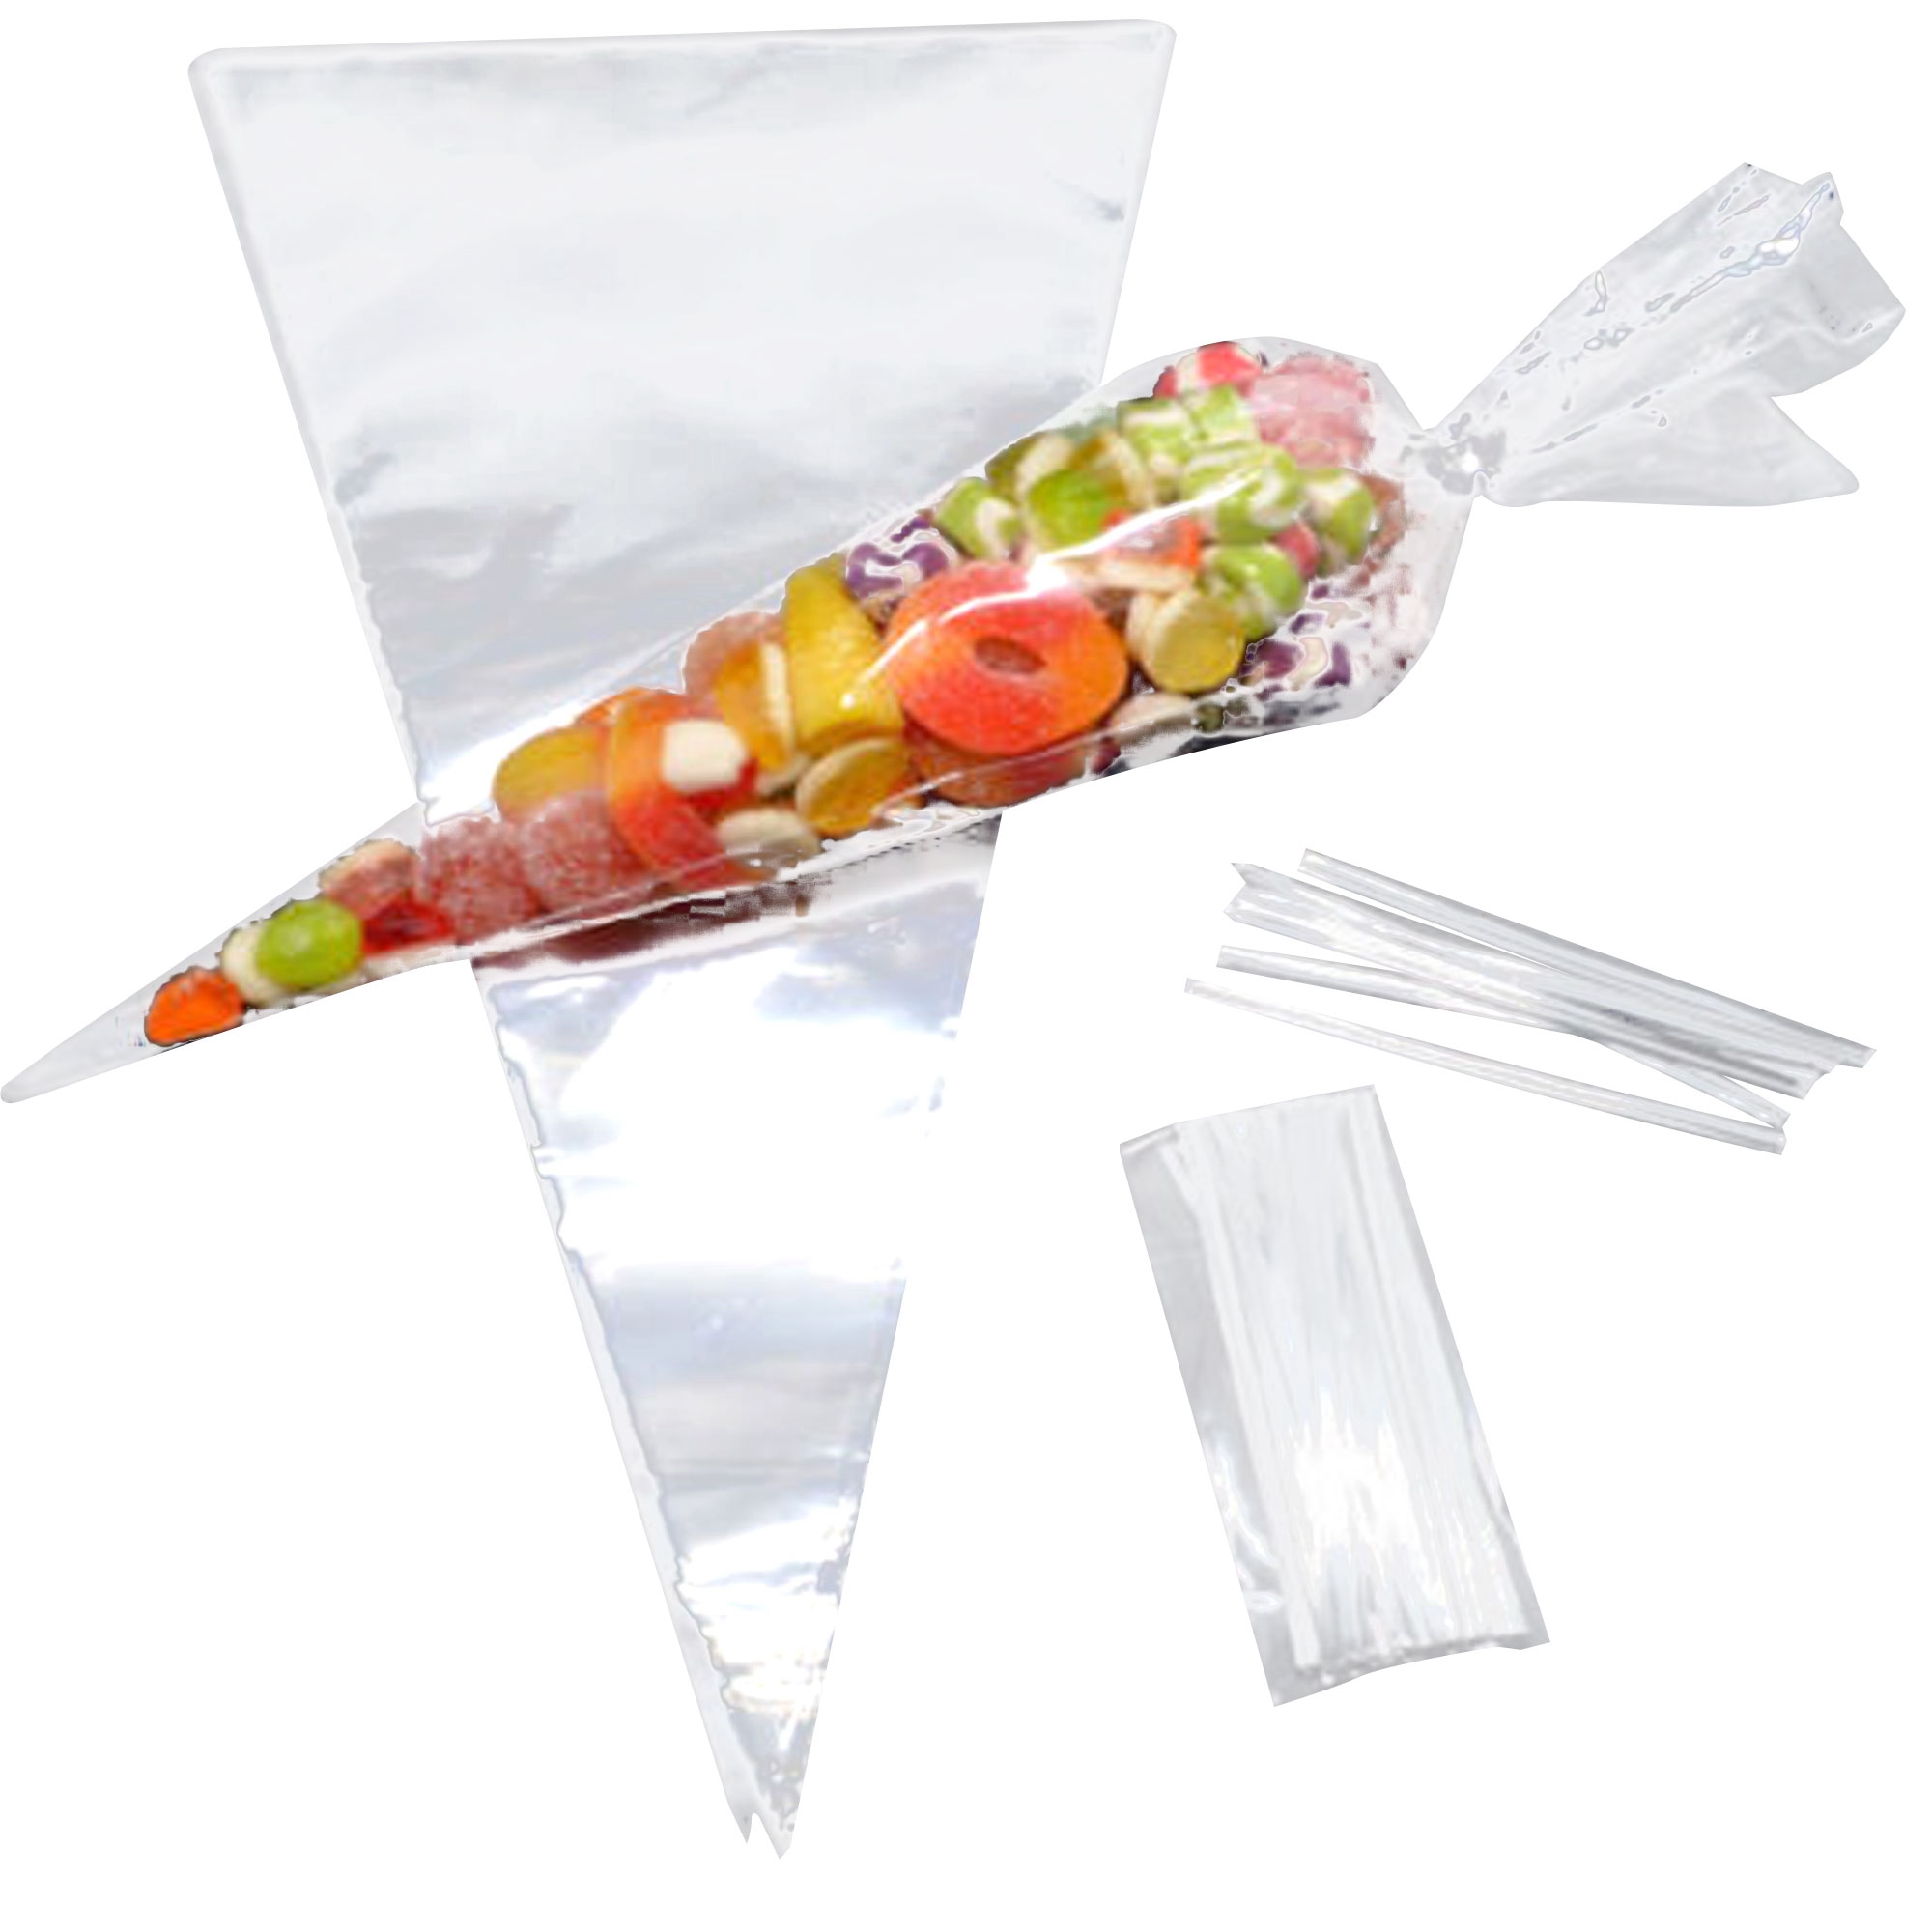 50PCS Clear Cone Shape Cellophane Bags Sweet Candy Popcorn Packing Bag~